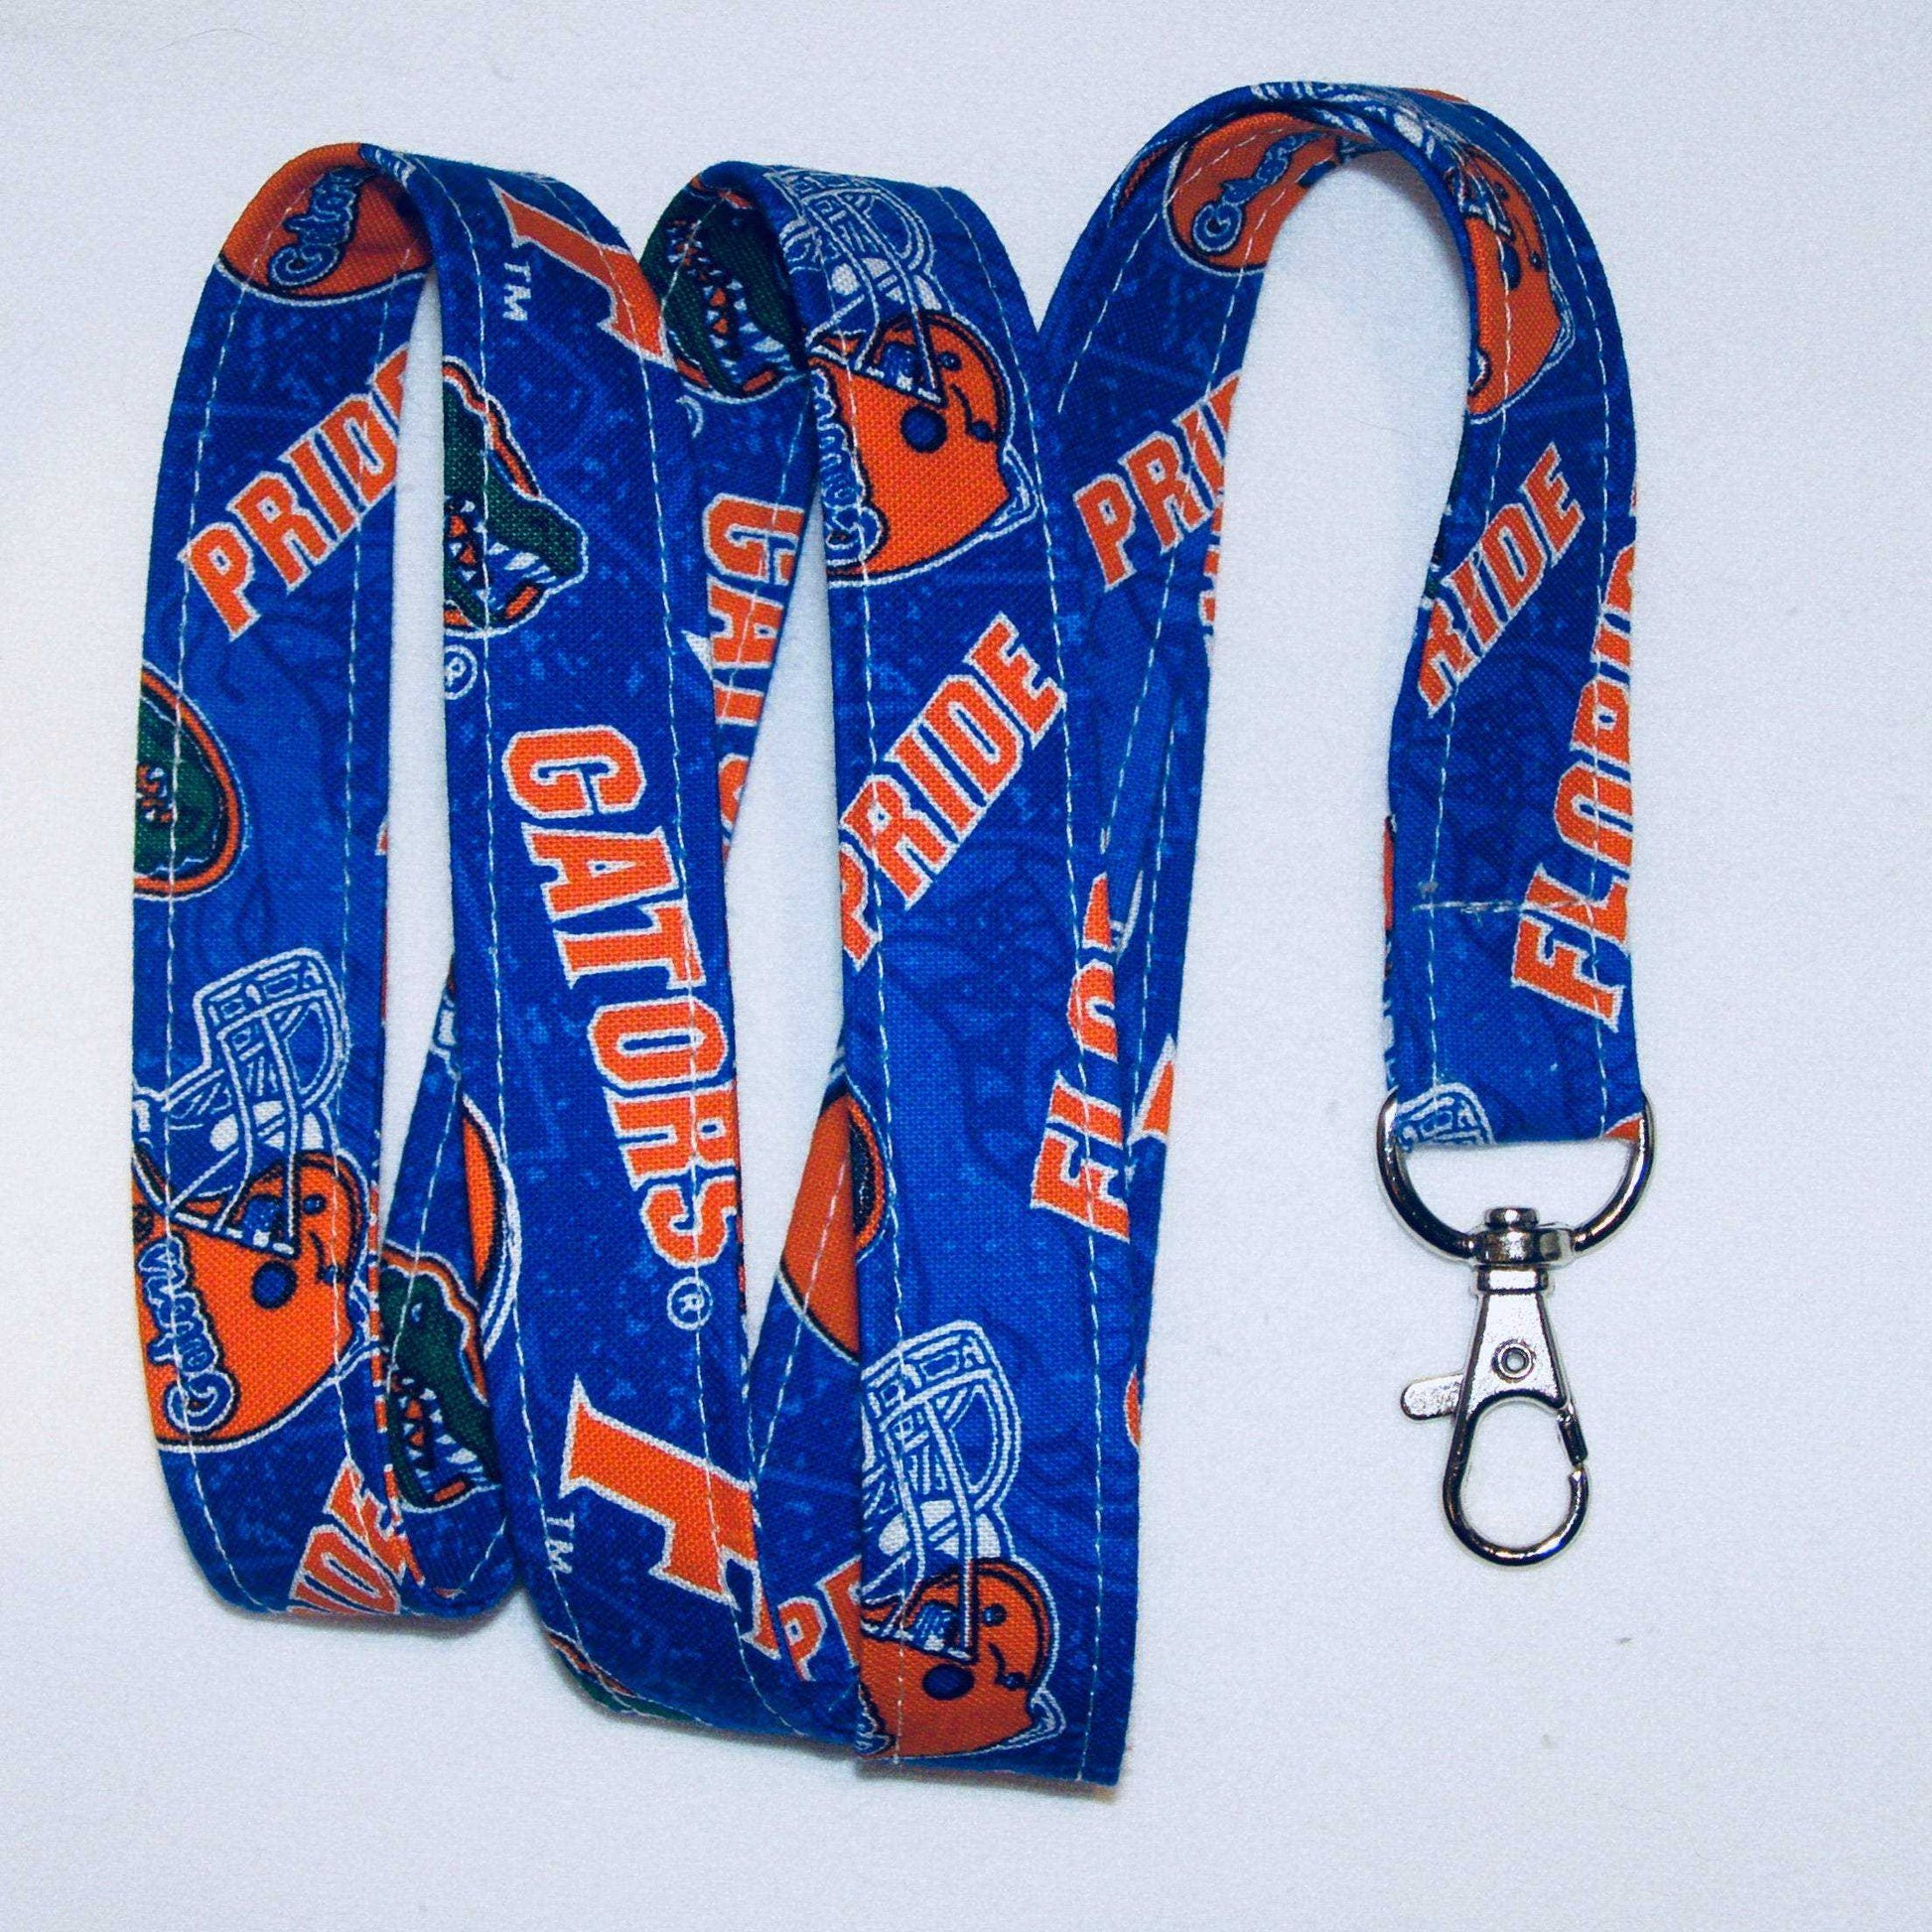 University of Florida Gators Lanyard Keychain Swivel Clasp Free Gift Box Included - Beachside Knits N Quilts